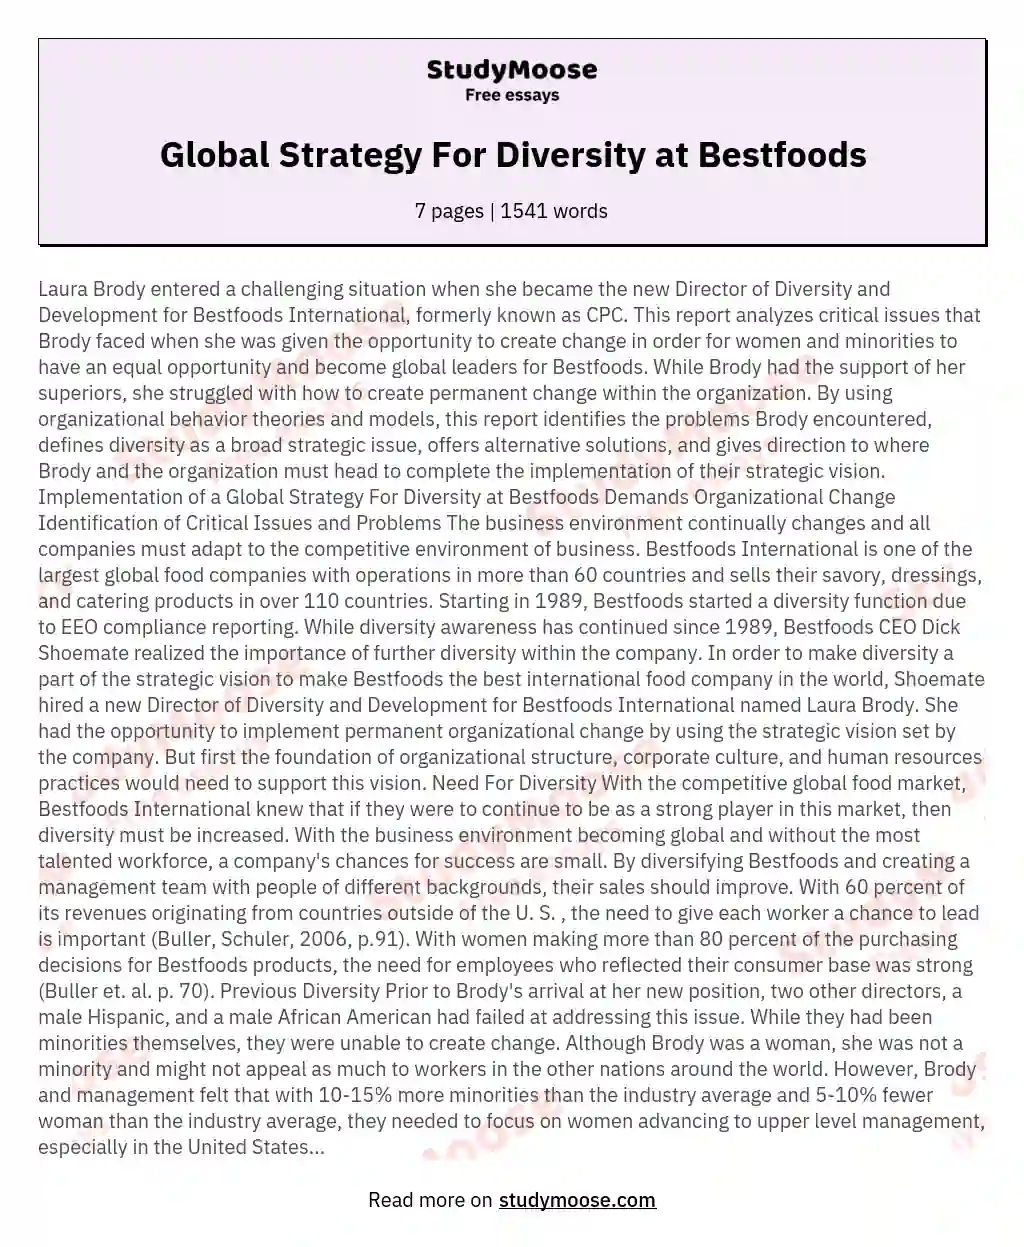 Global Strategy For Diversity at Bestfoods essay